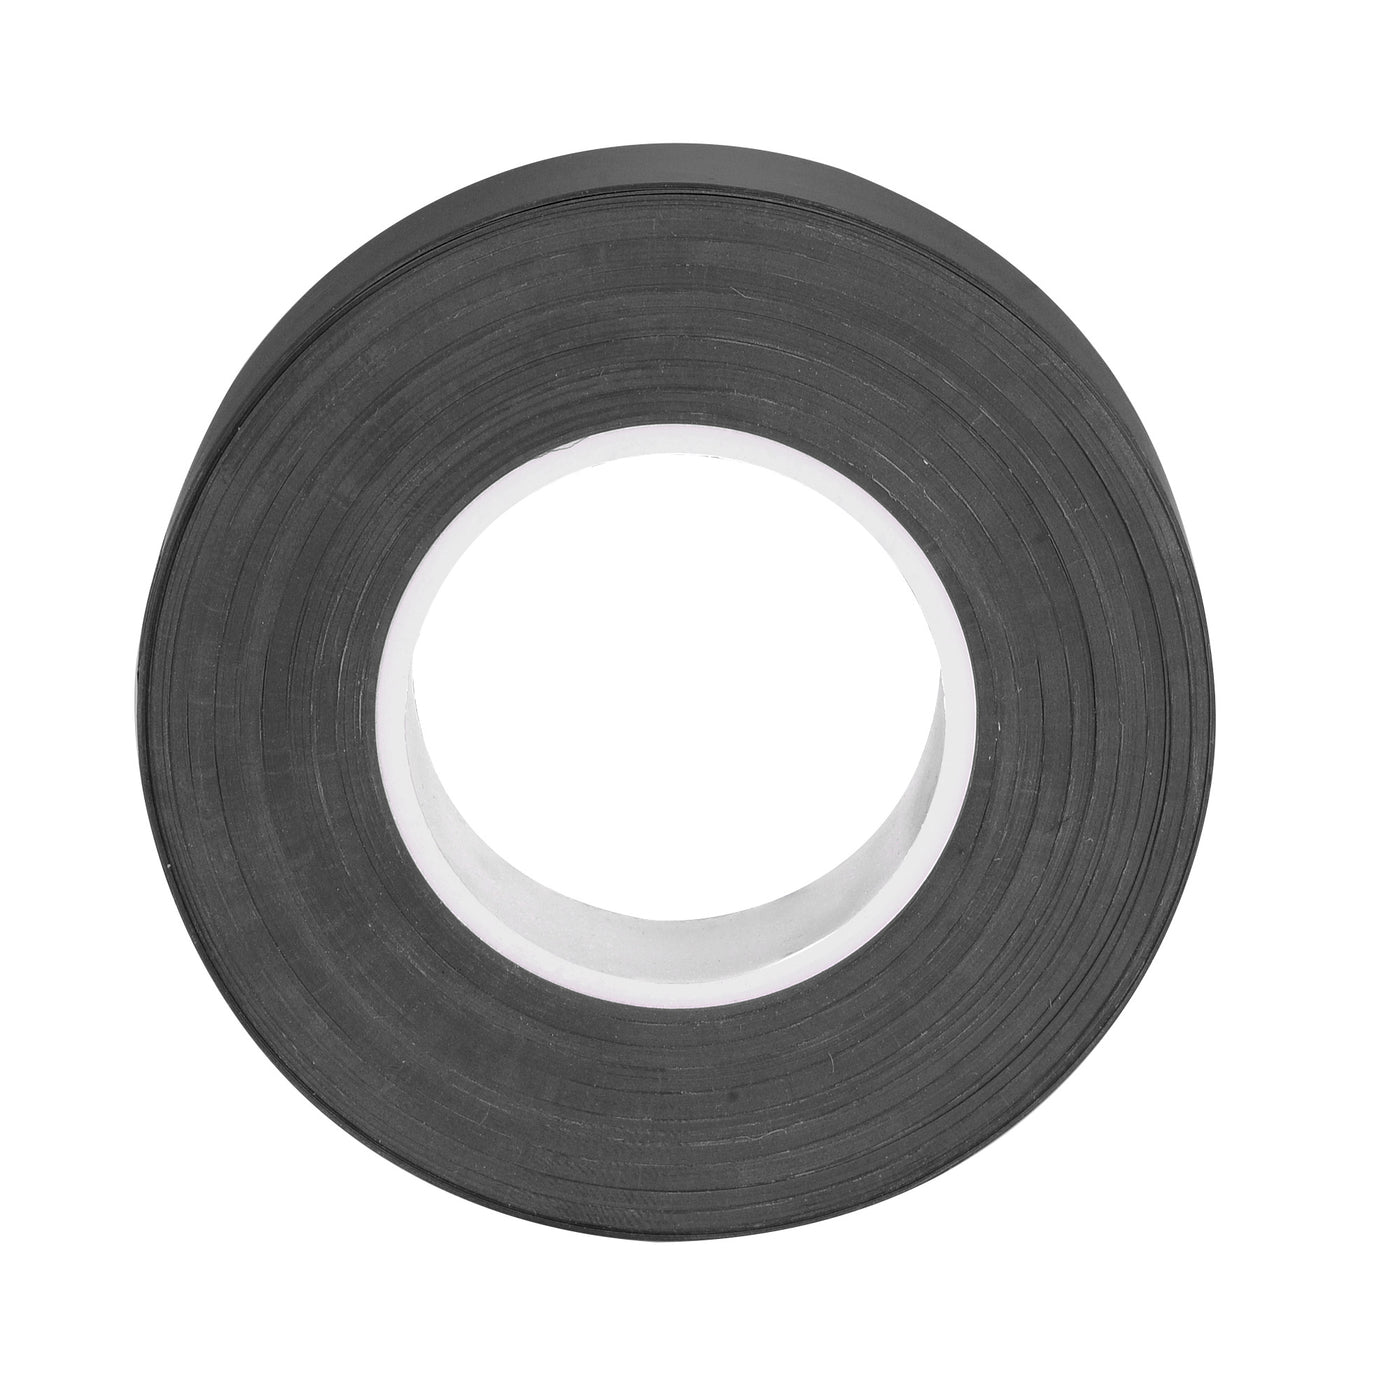 uxcell Uxcell PVC Flagging Tape 20mm x 20m/65.6ft Marking Tape Non-Adhesive Black 3pcs